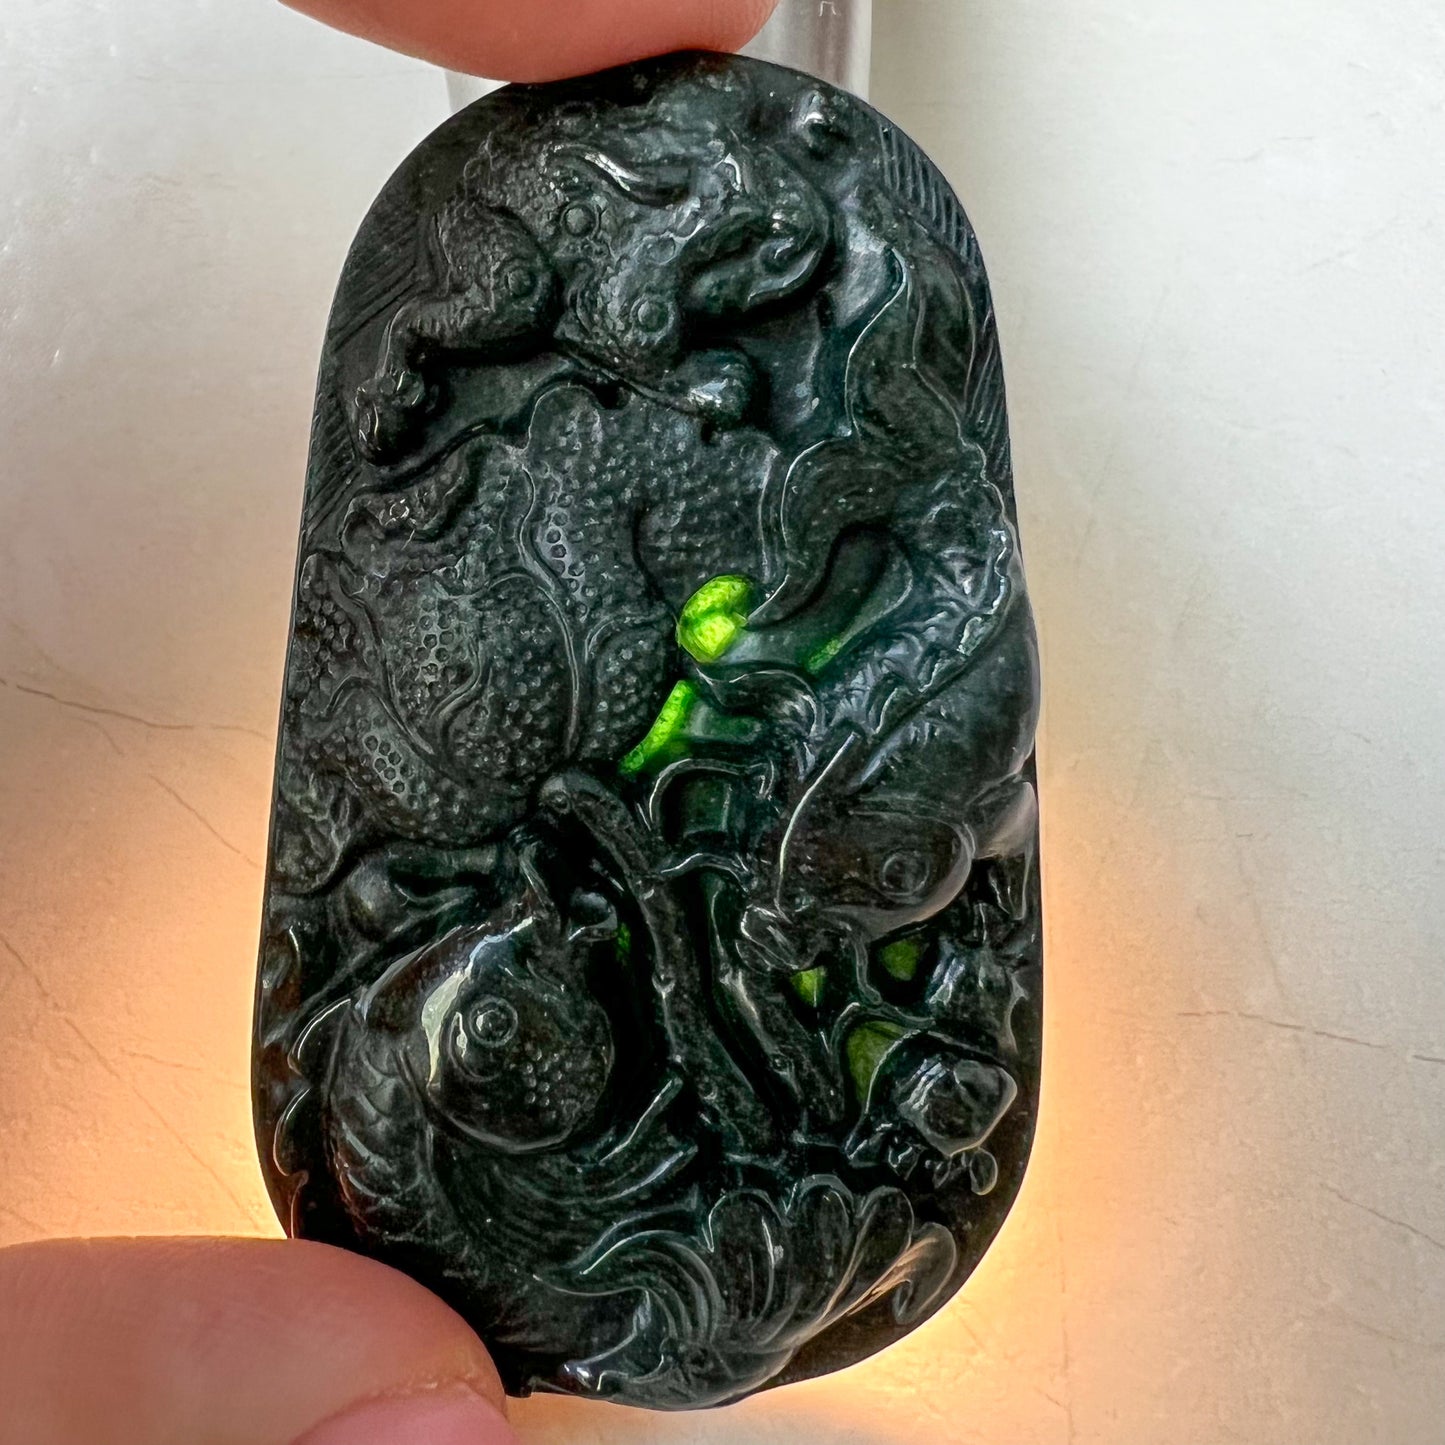 Black Jadeite Jade Twin Fish, Omphacite Jade, Pisces Zodiac Horoscope Necklace, Hand Carved Pendant Necklace, LGG-0322-1667010045-1 - AriaDesignCollection